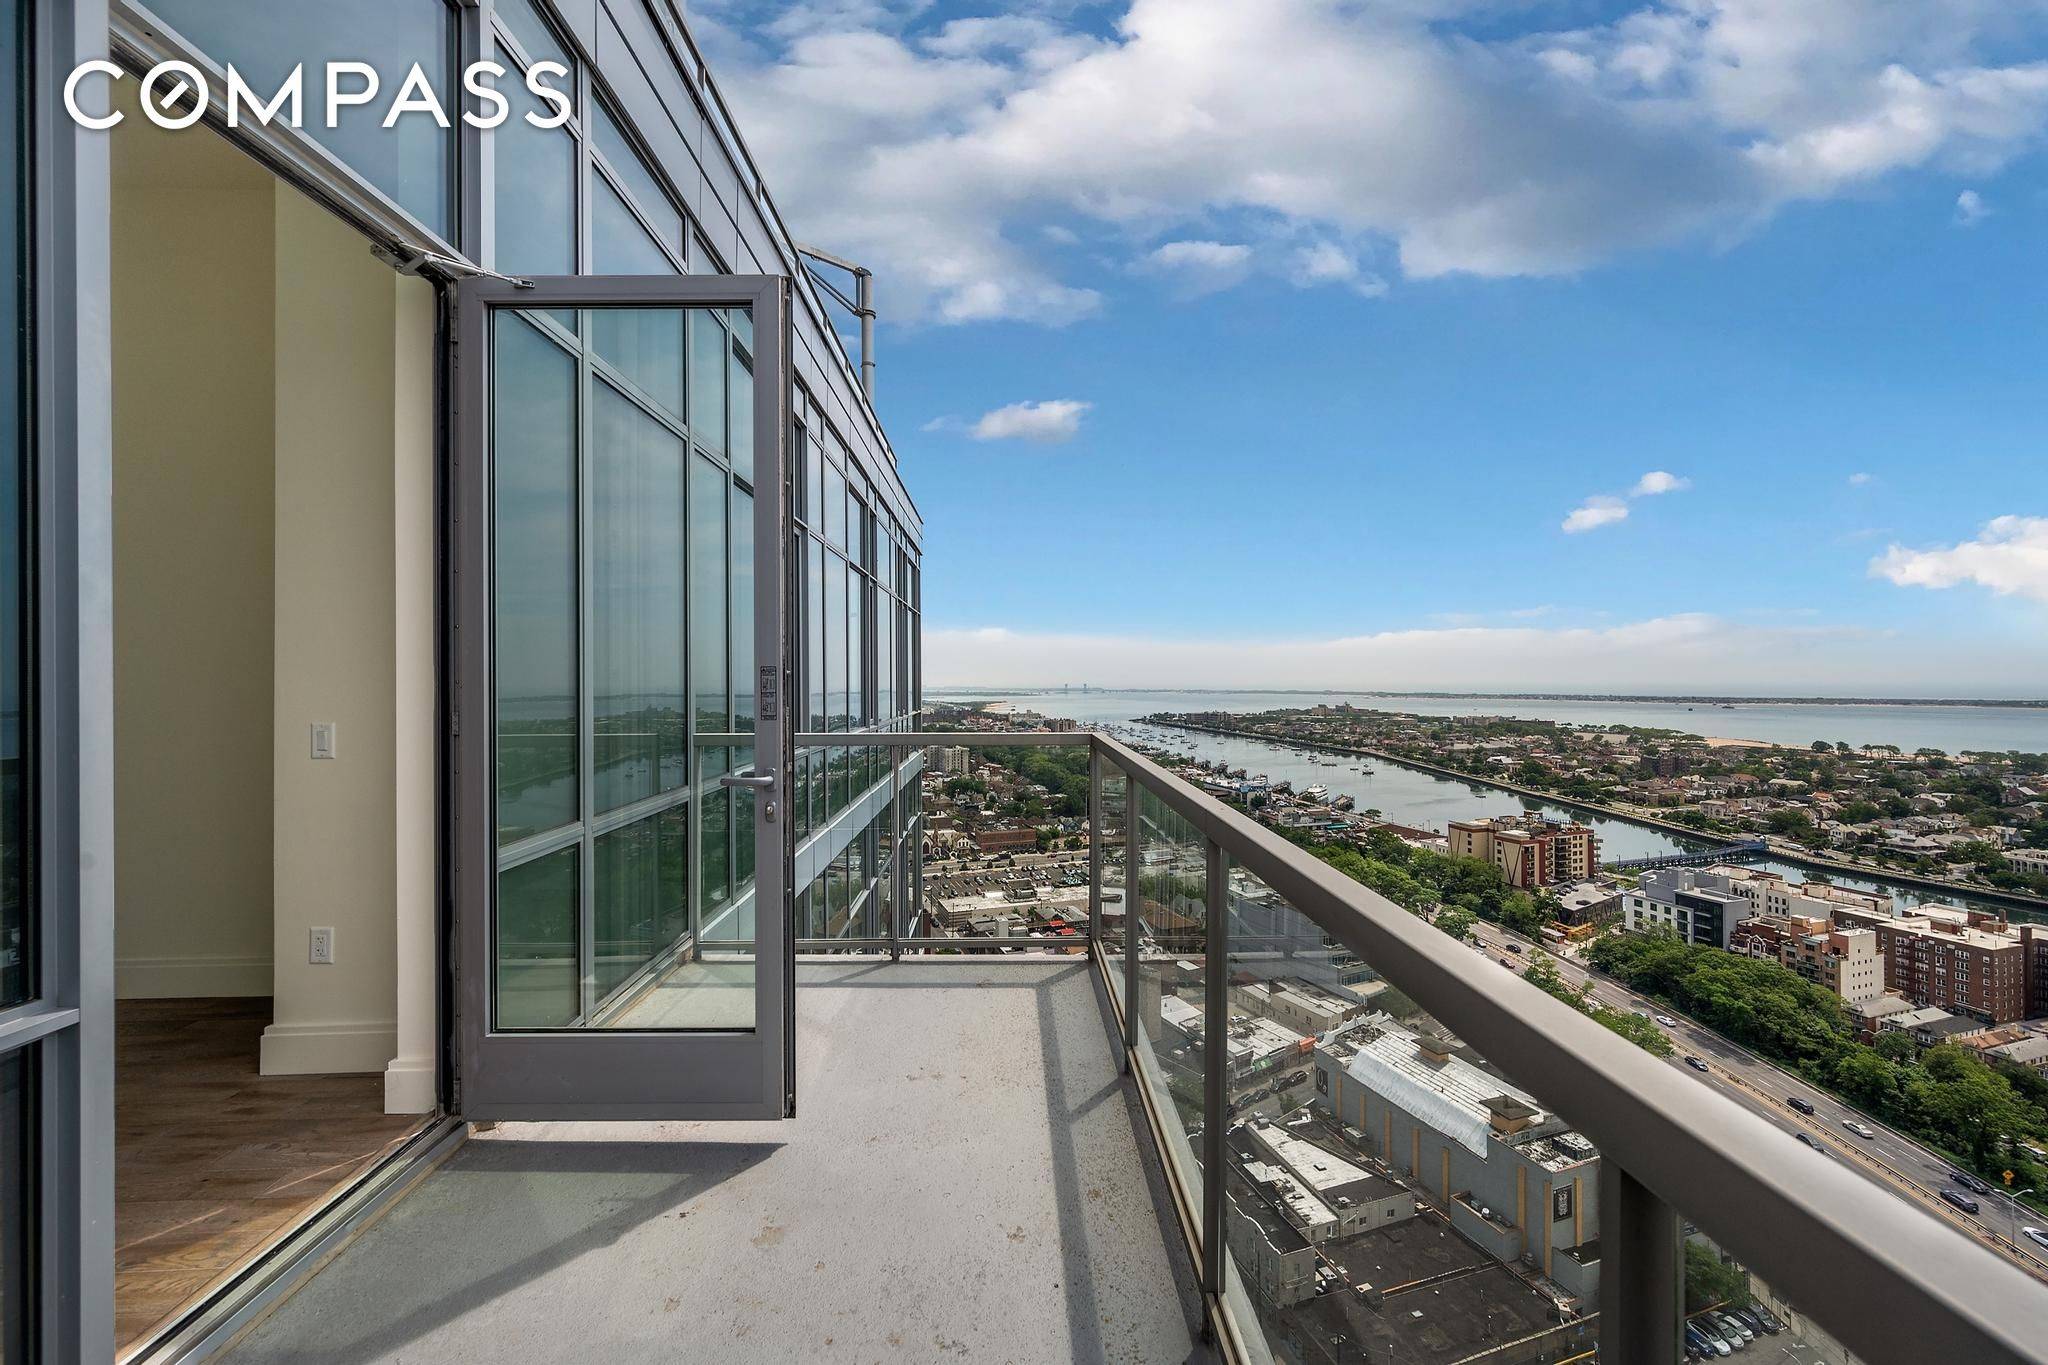 Live among the city's most iconic vistas in this extraordinary three bedroom, three bathroom penthouse offering sun drenched southern and eastern exposures, two terraces and designer interiors in a modern, ...